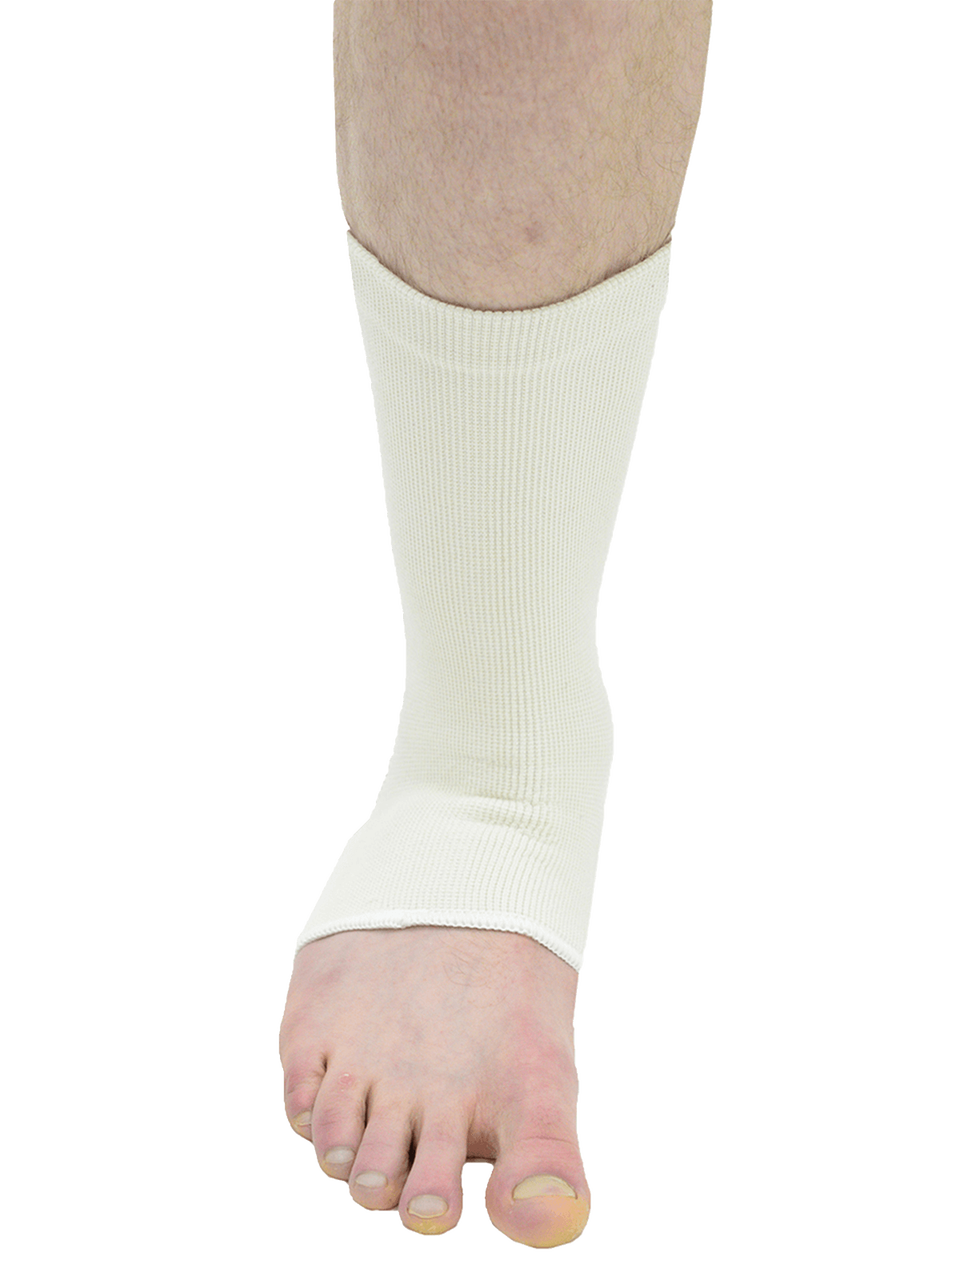 MAXAR Wool/Elastic Ankle Brace (Two-Way Stretch, 56% Wool) - White